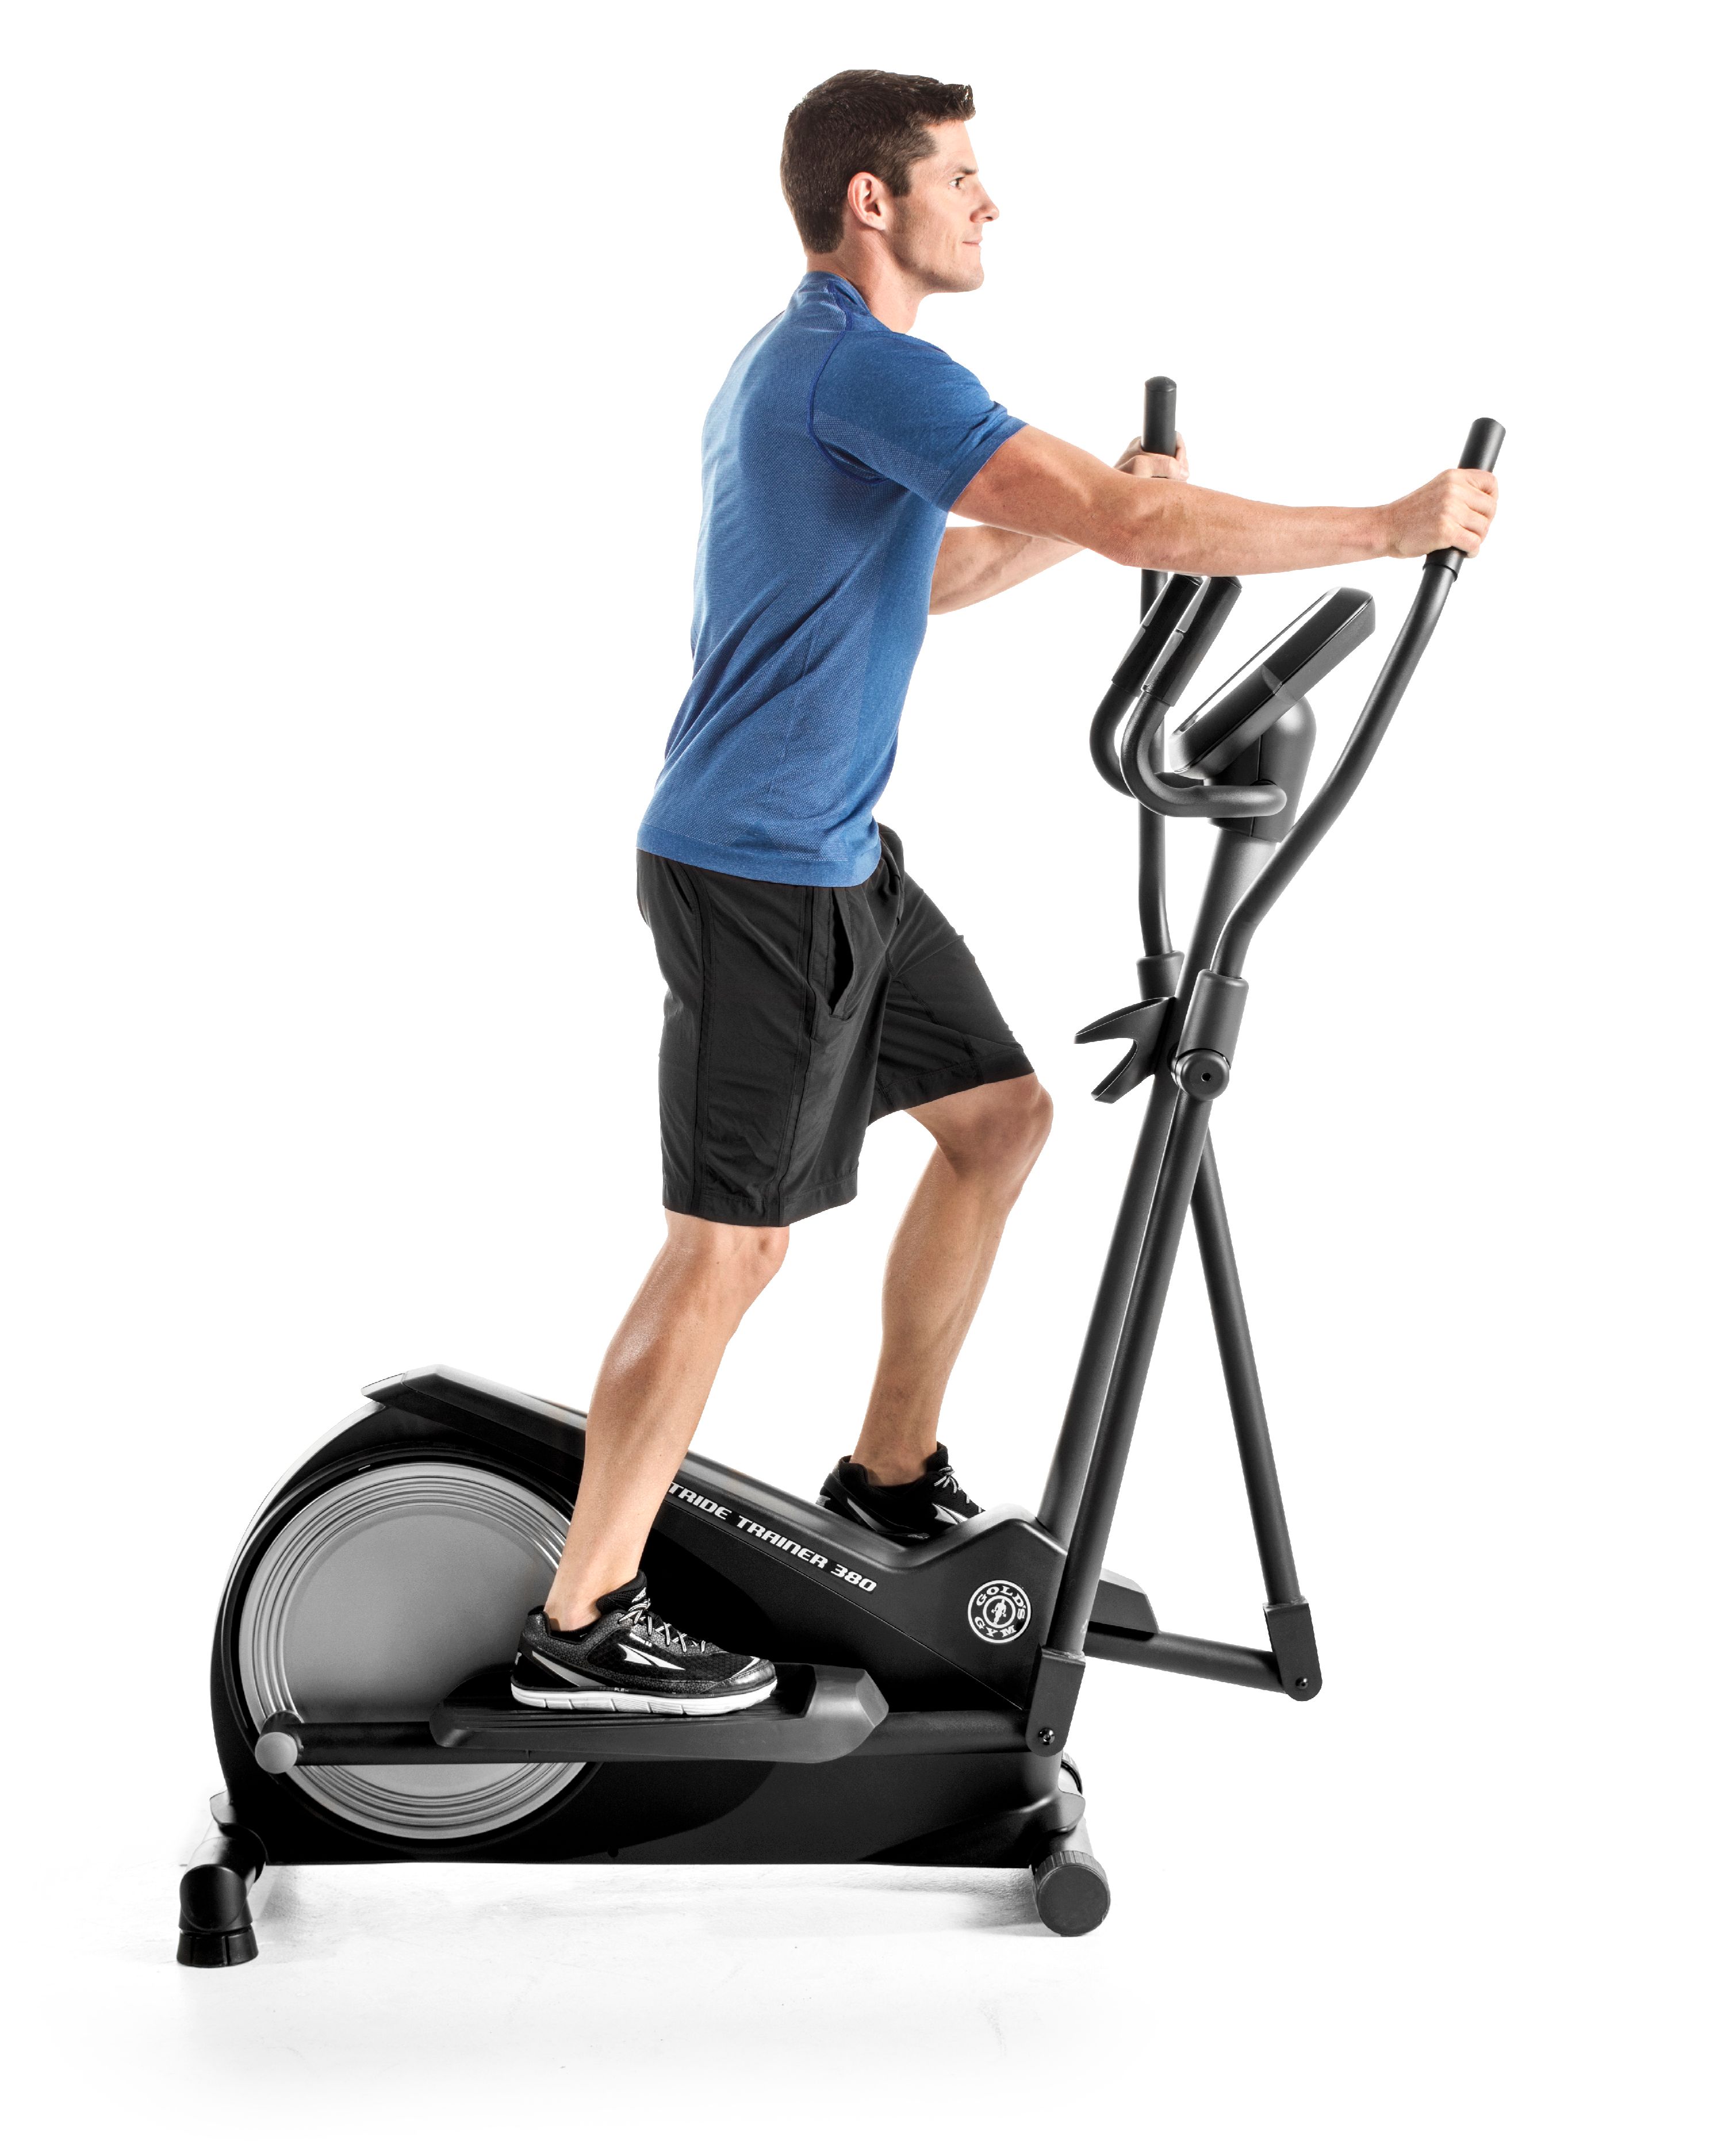 Gold's Gym Stride Trainer 380 Elliptical, iFit Coach Compatible - image 3 of 9